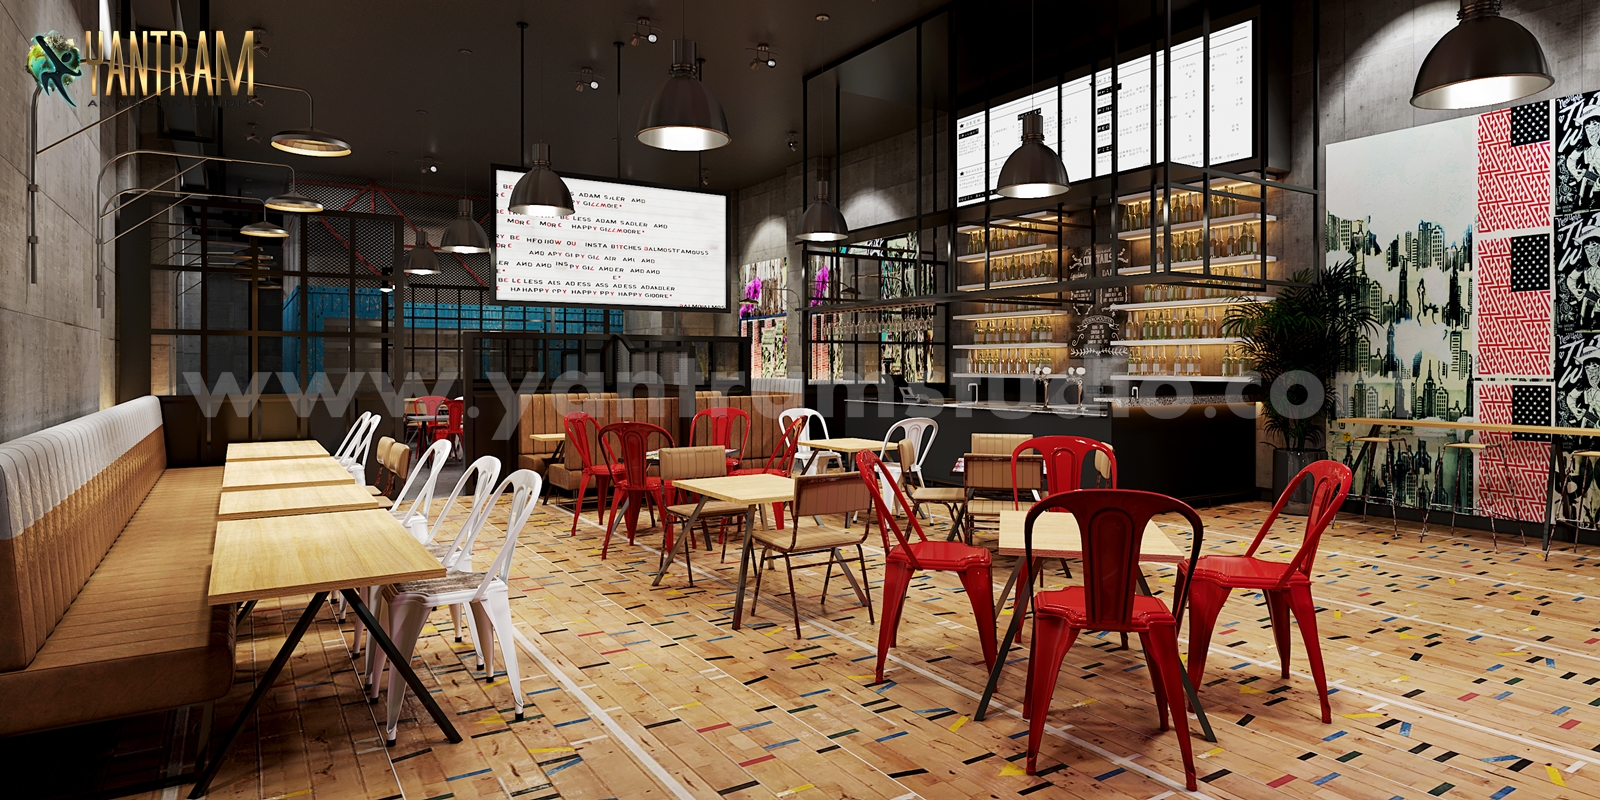 3D Interior Modeling of Architectural Cafe Design with seating area by Architectural Rendering Companies, Rome – Italy